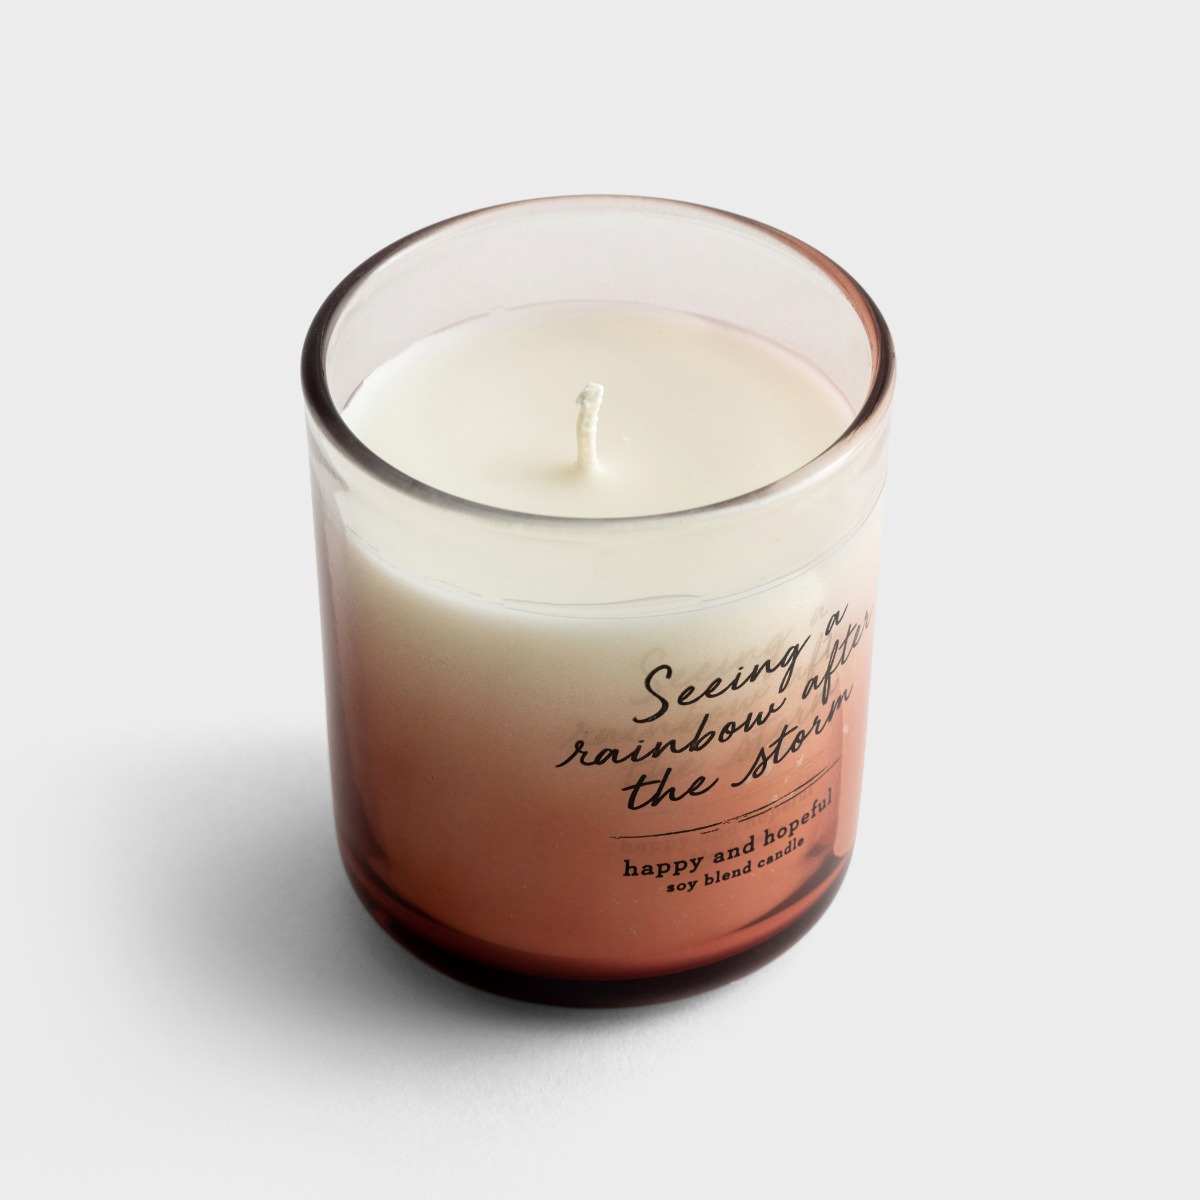 Seeing A Rainbow After The Storm - Soy Candle